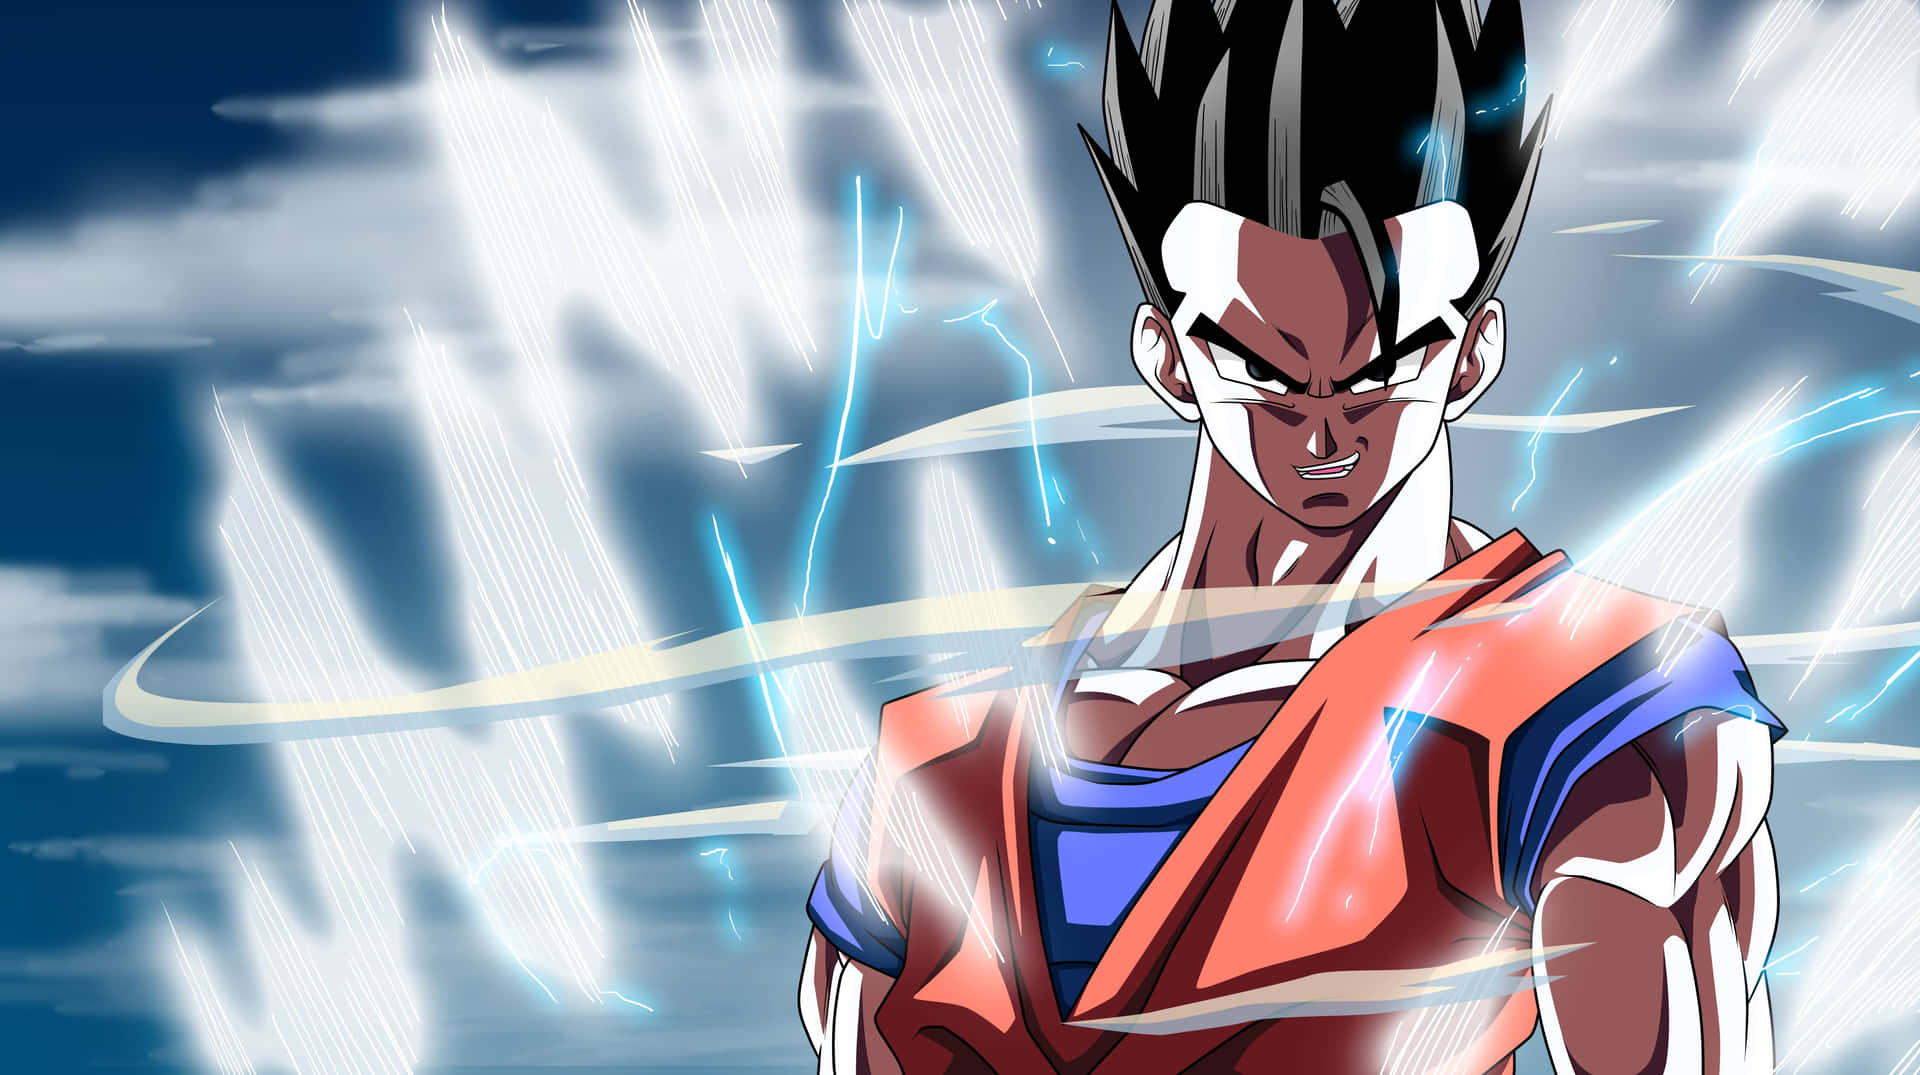 Mystic Gohan standing tall and confident Wallpaper